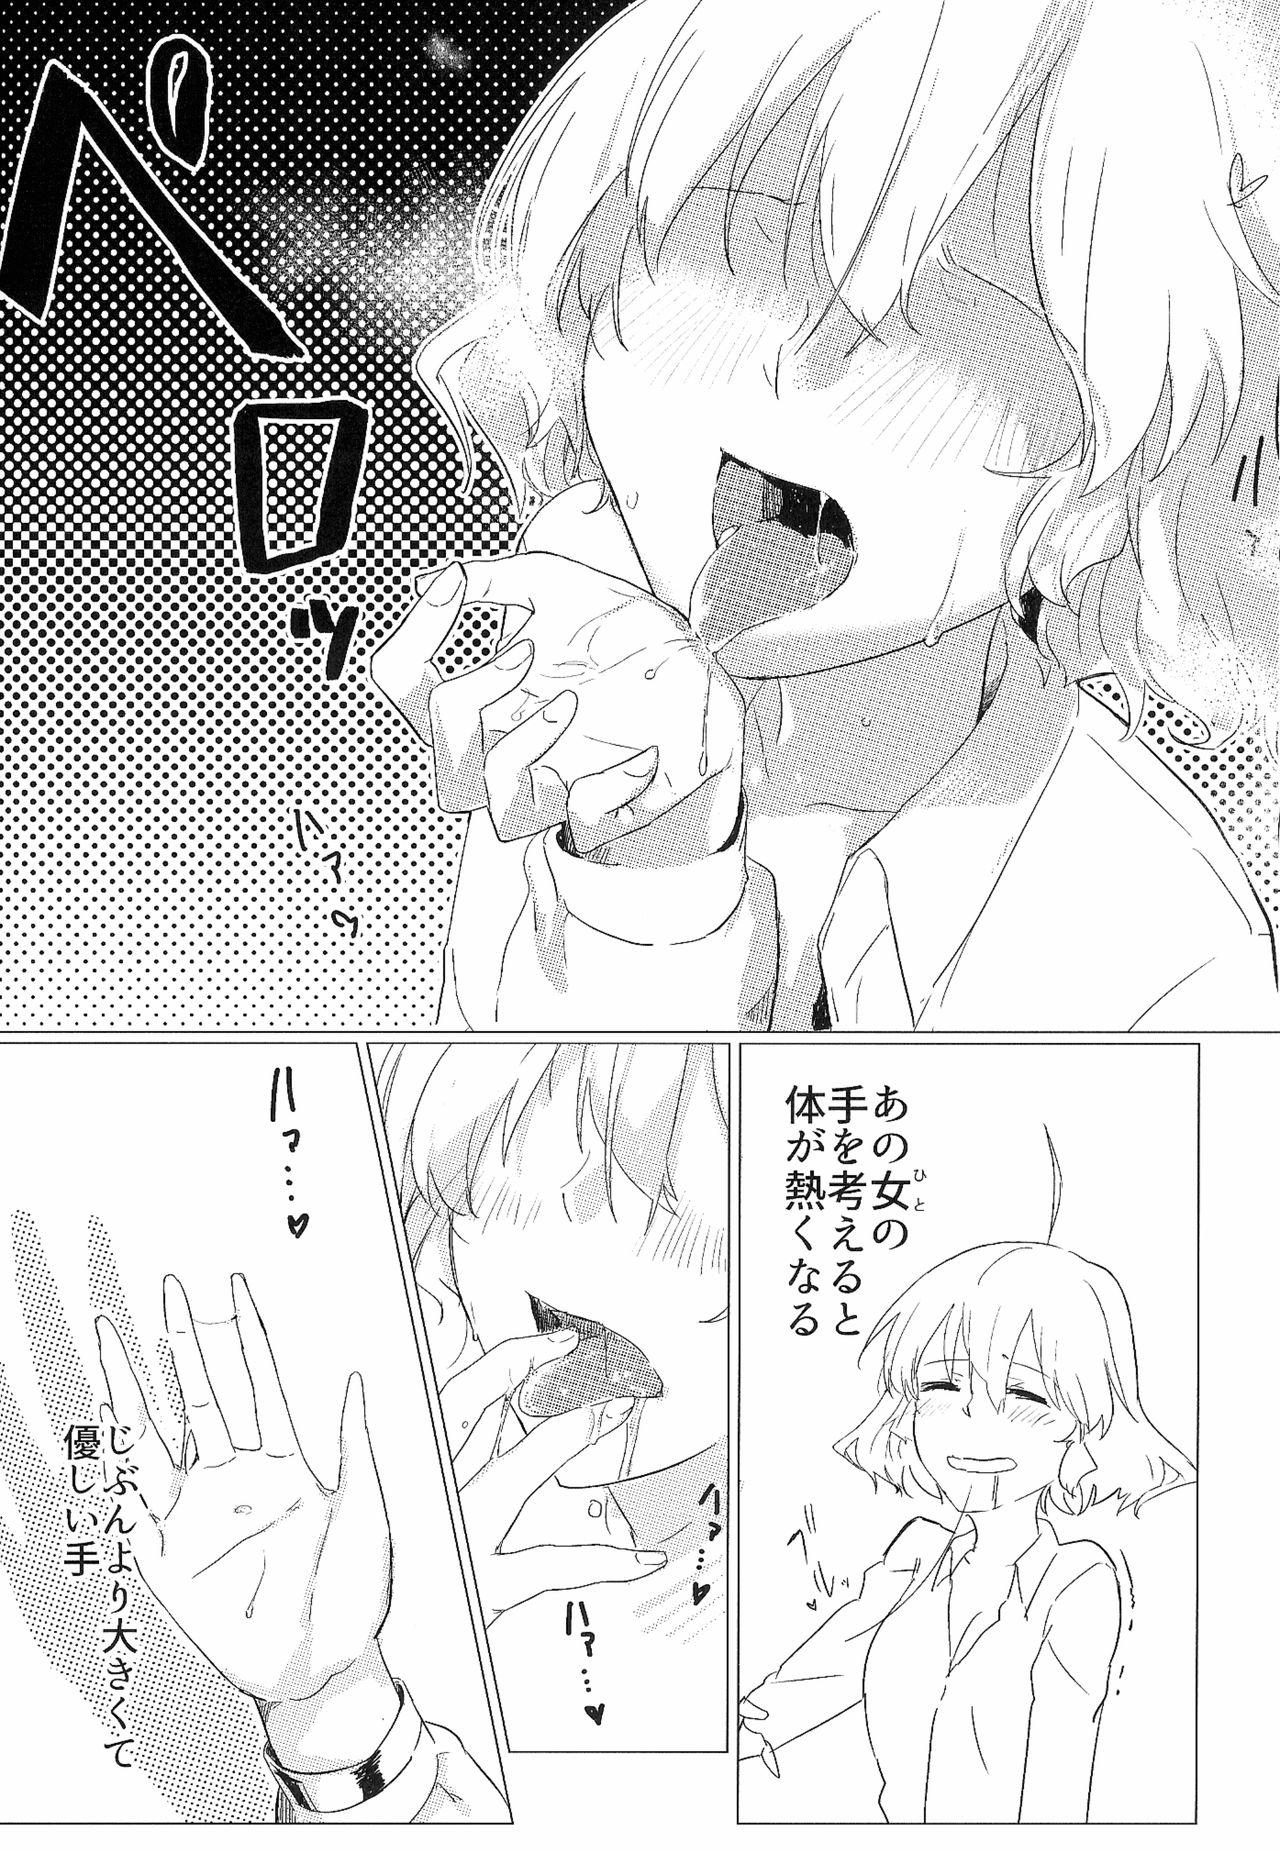 Casting Wine-Red Orgasm - Akuma no riddle Edging - Page 6